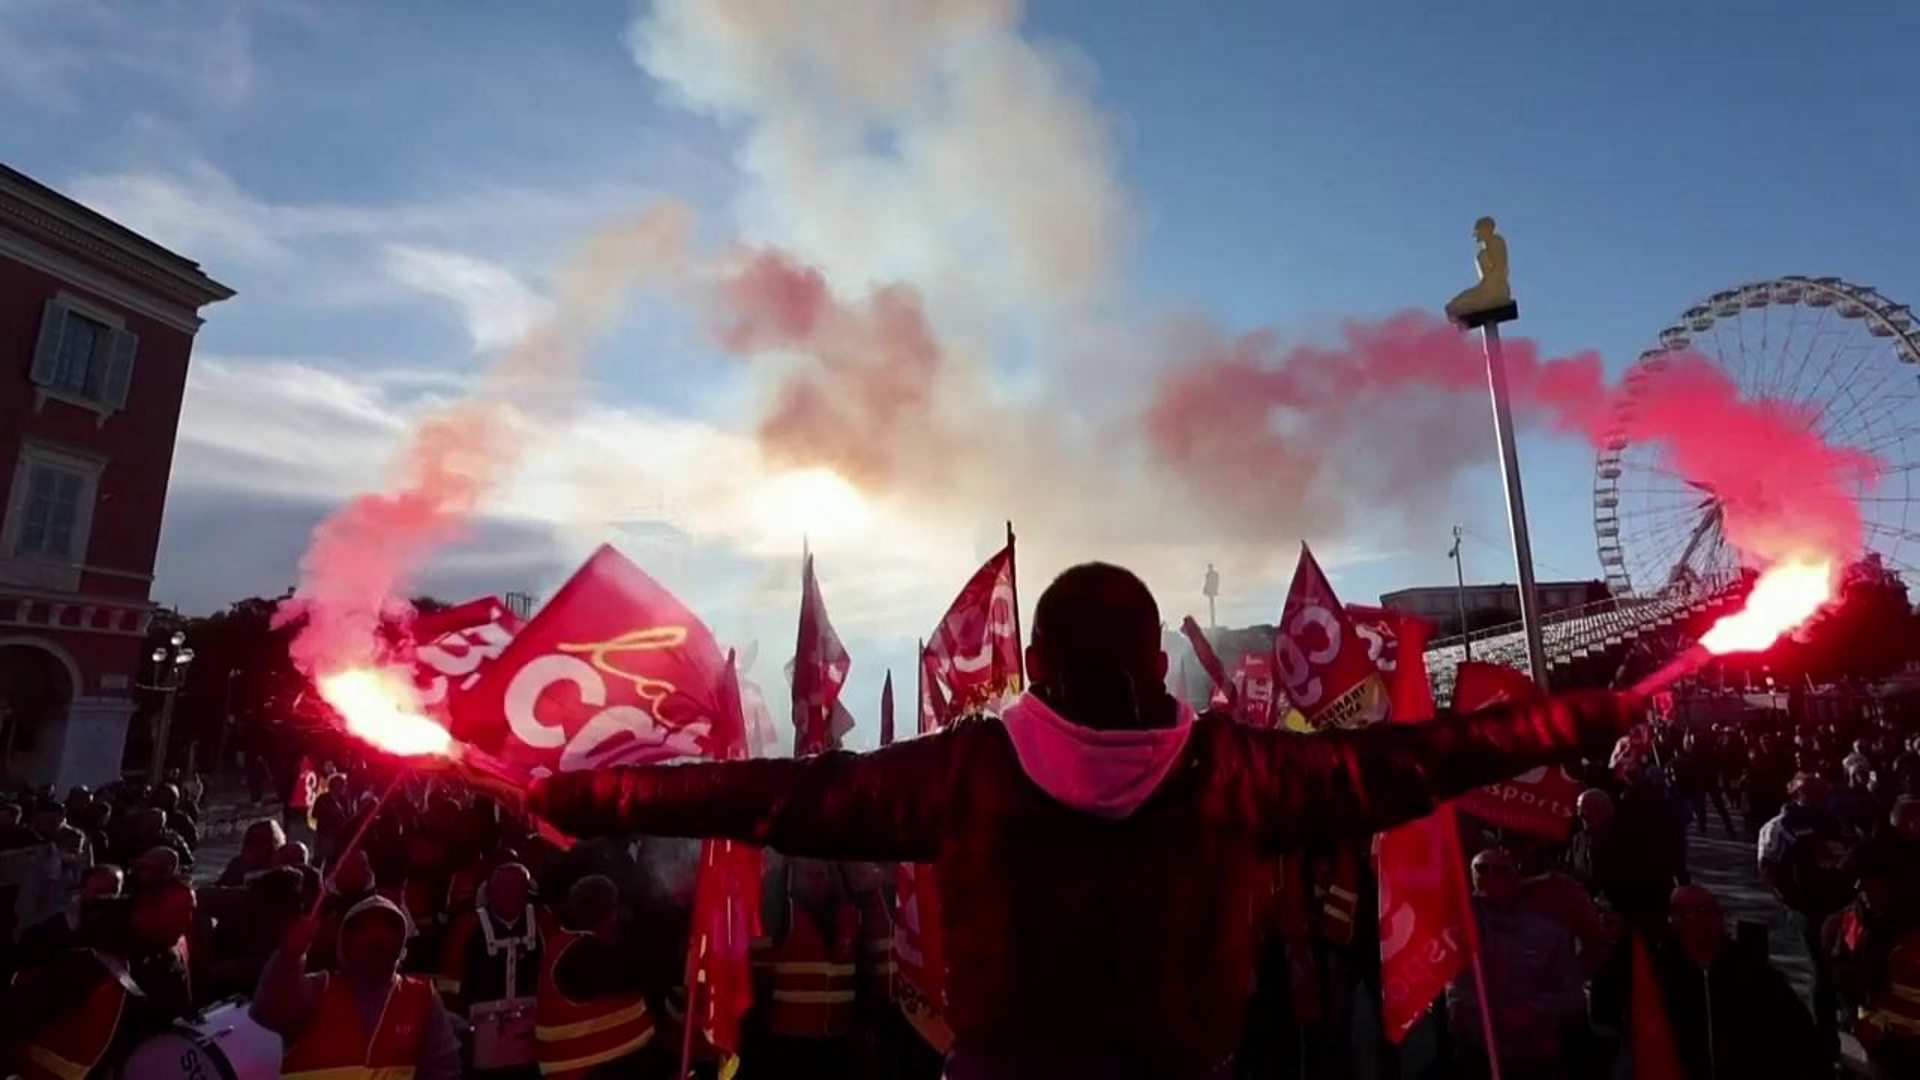 Flares and drums as protesters strike across France